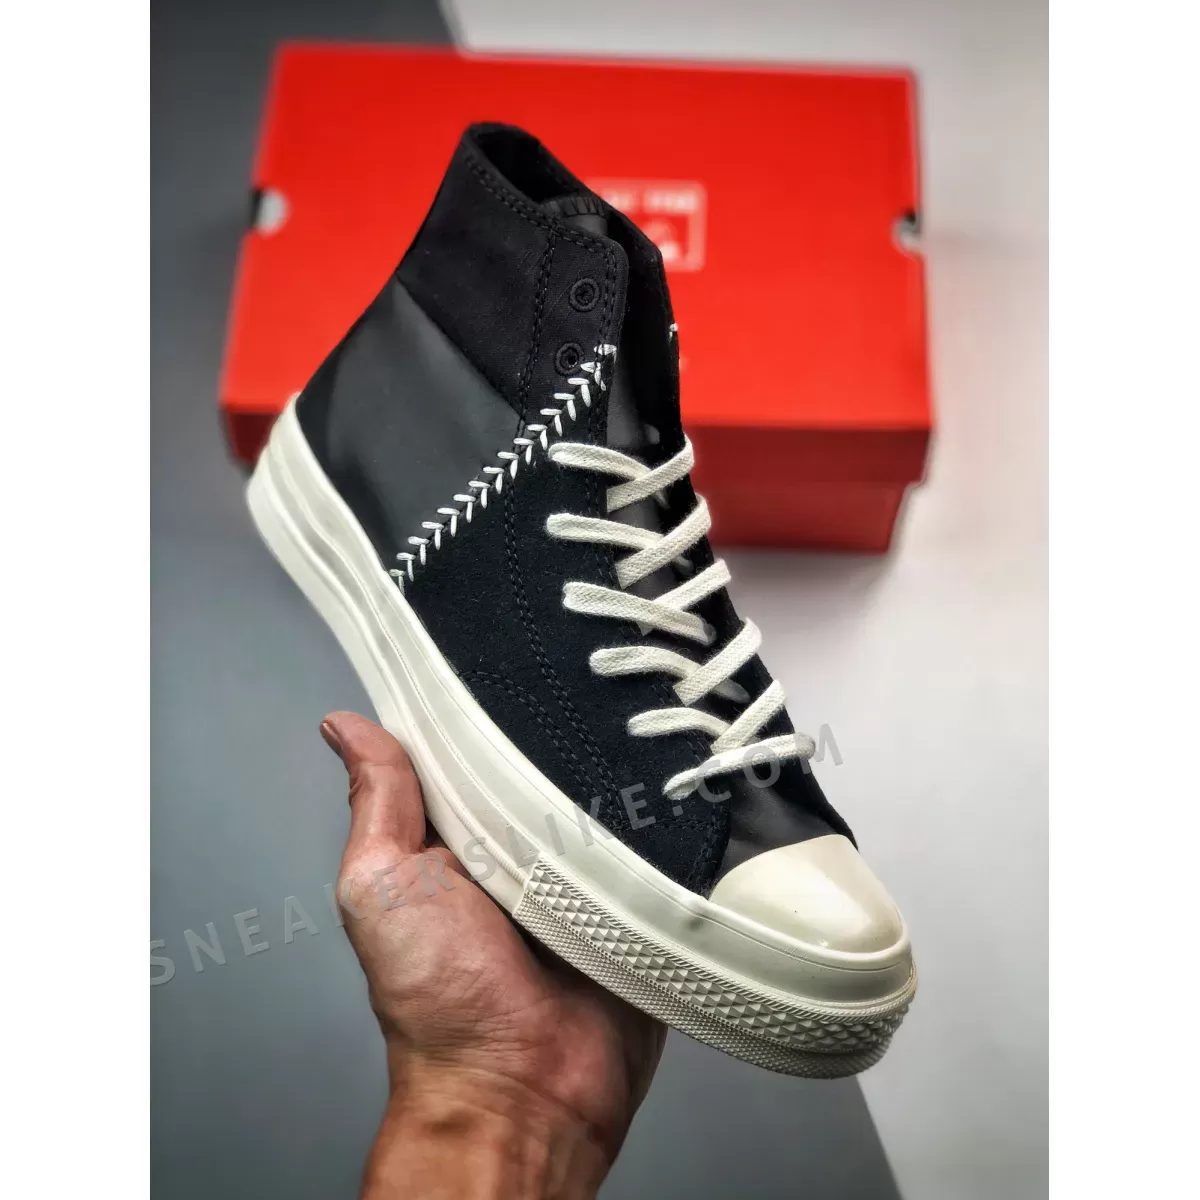 Converse Chuck 70 Crafted Leather Black/Egret/University Red 173131C / chuck 70 high top red